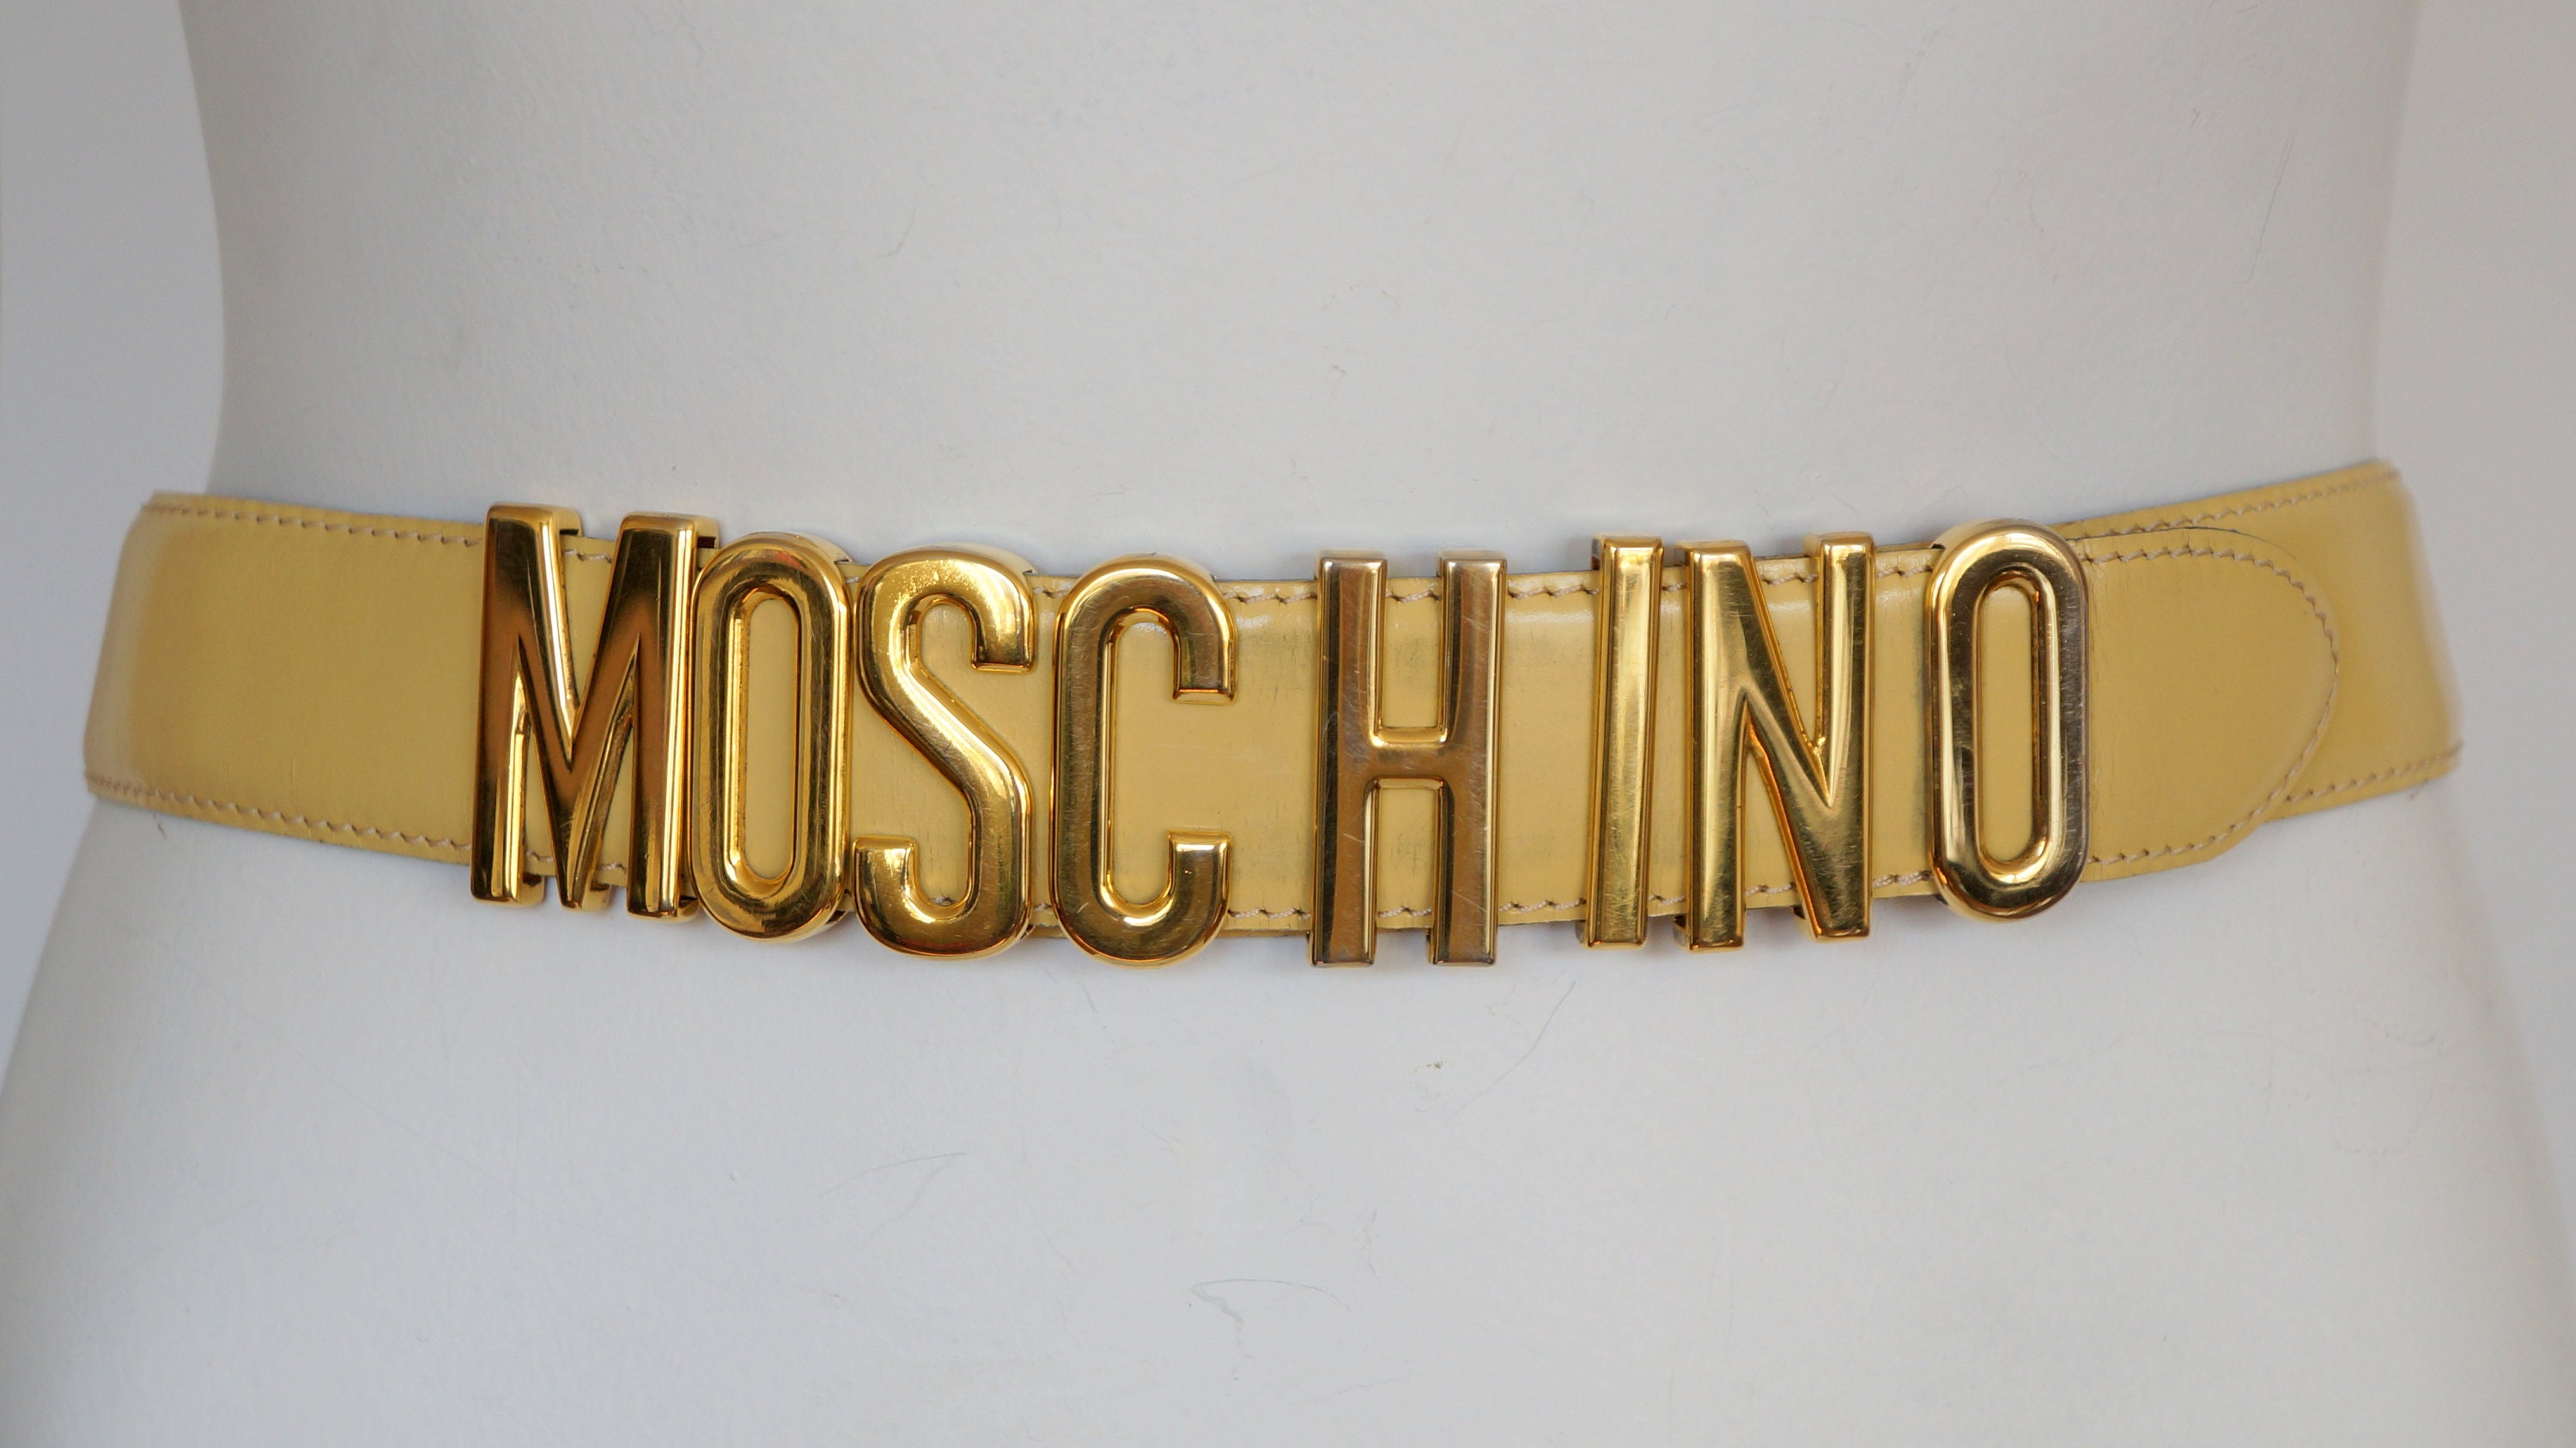 Vintage Moschino belt letters Redwall gift for her leather | Etsy